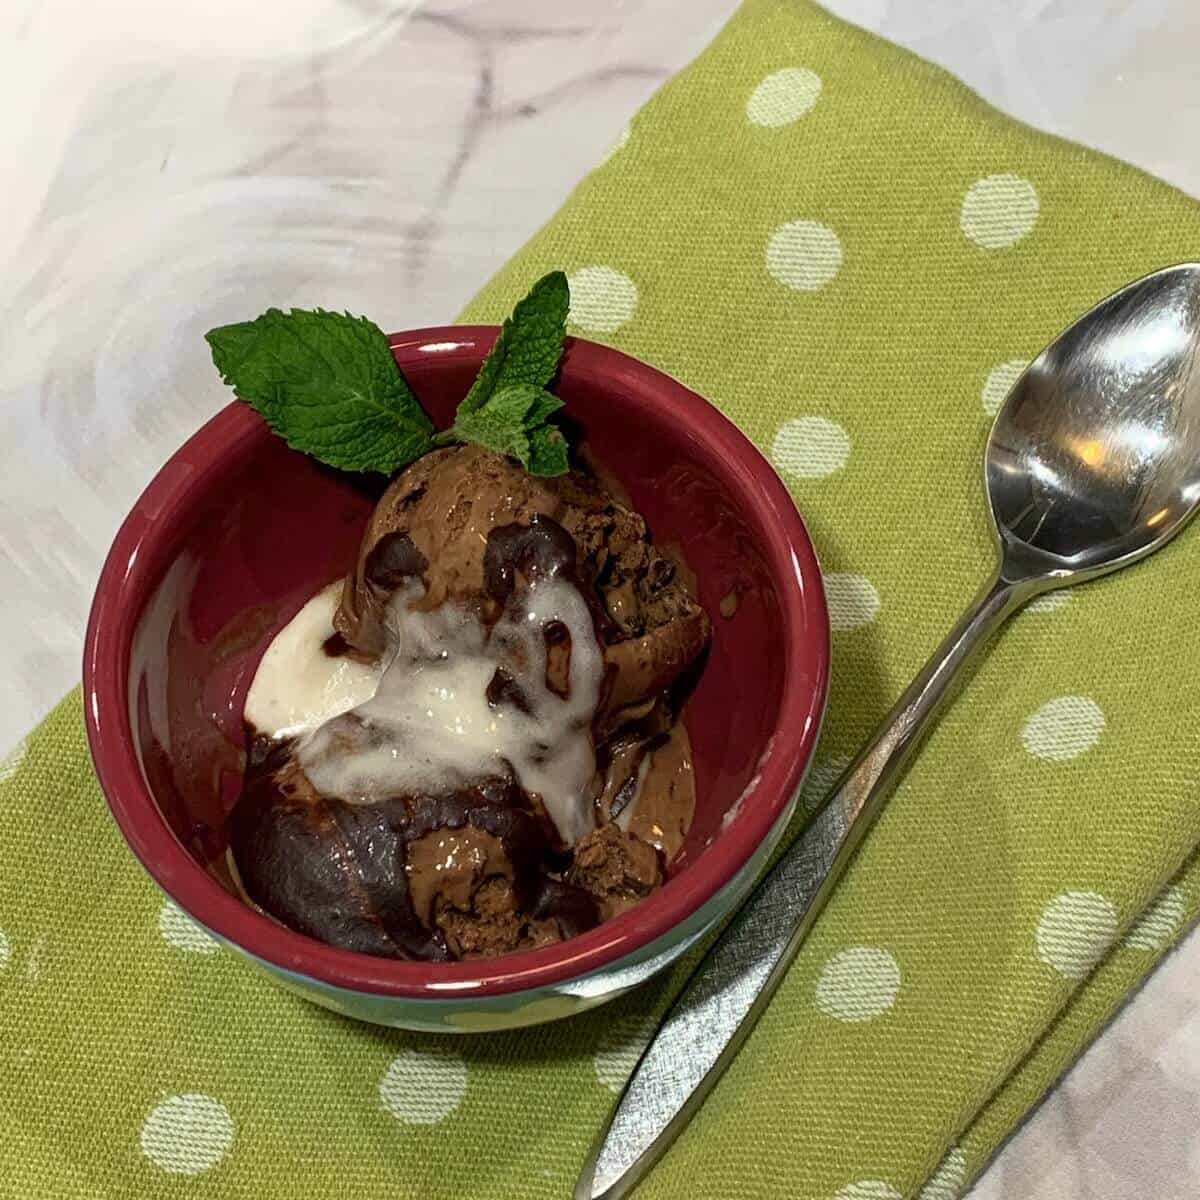 Chocolate Mint Chip gelato sundae in bowl on a green spotted towel next to a spoons.